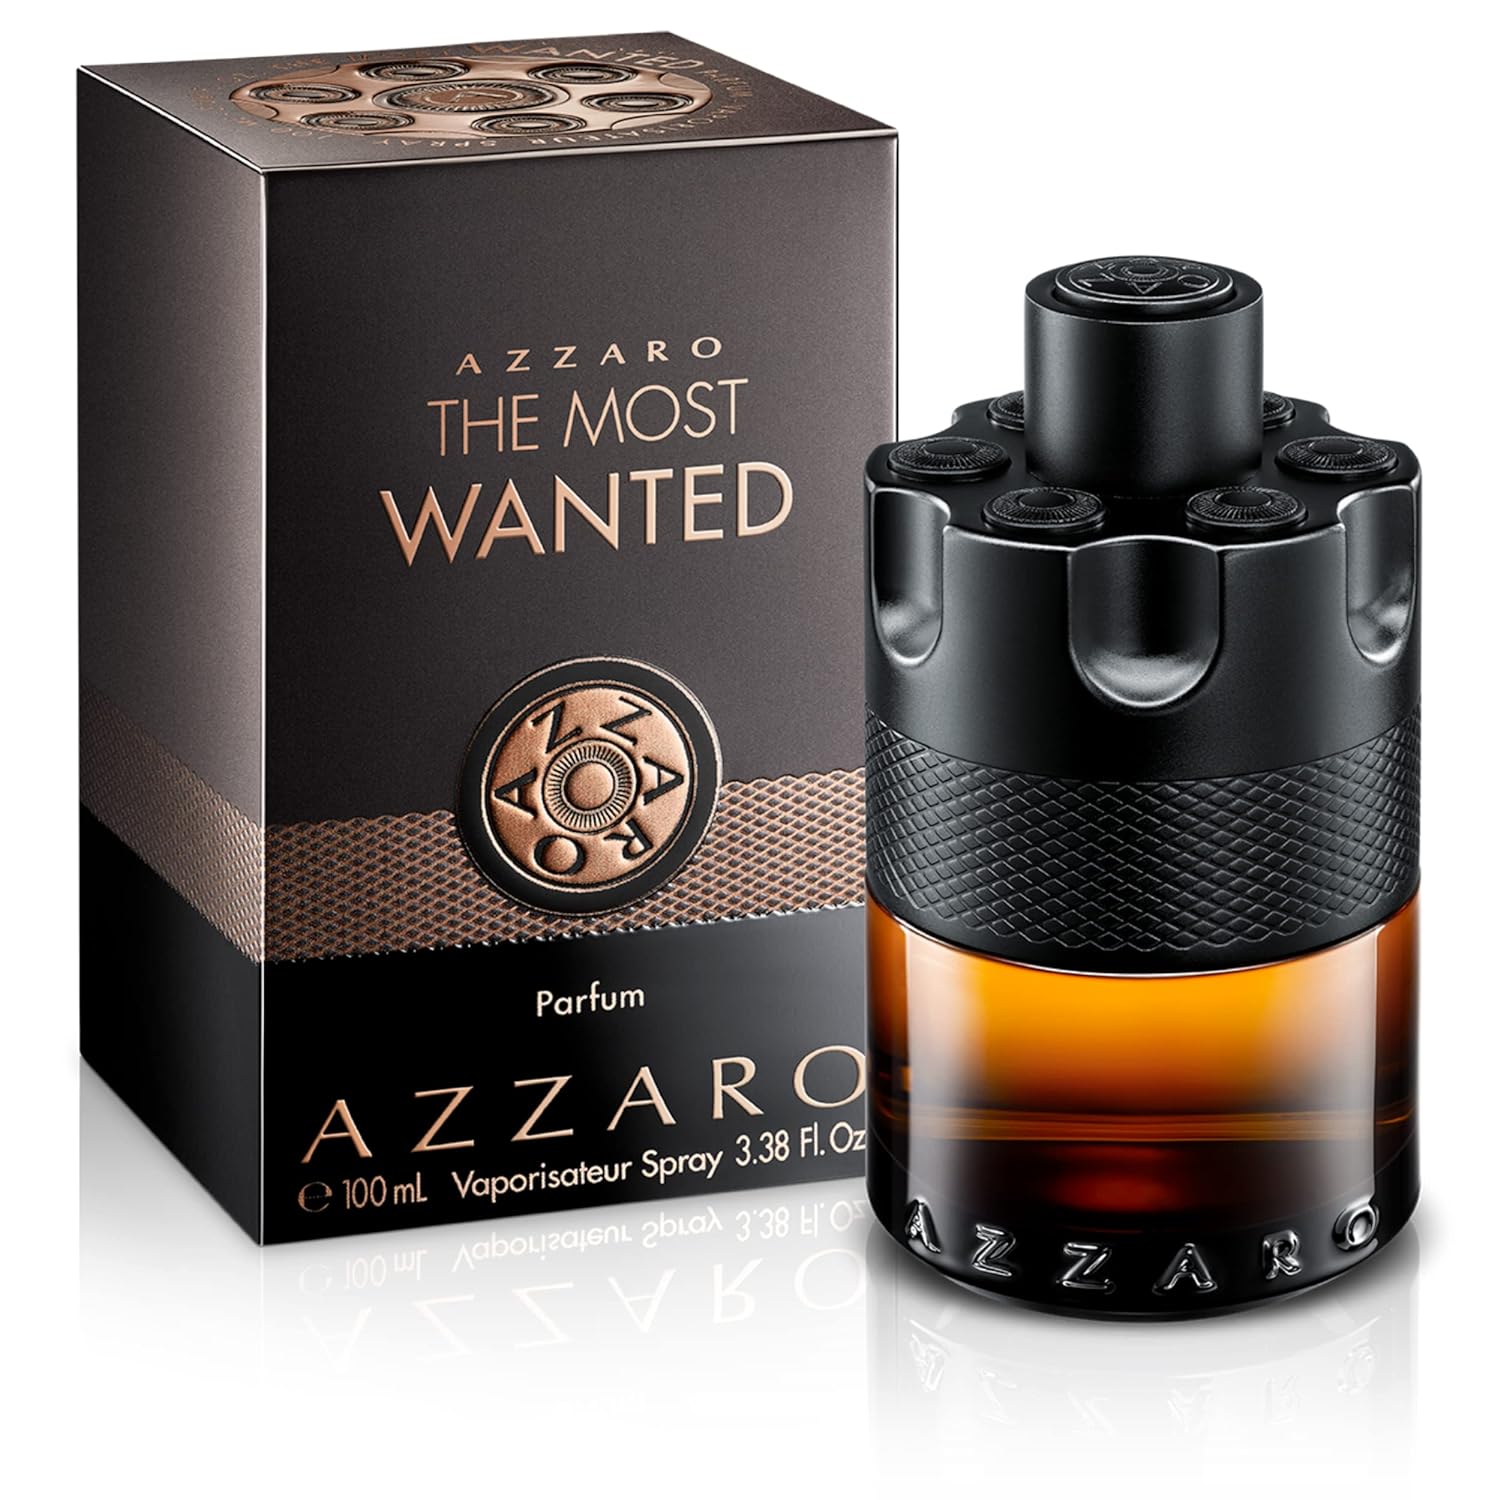 Azzaro Wanted The Most Parfum